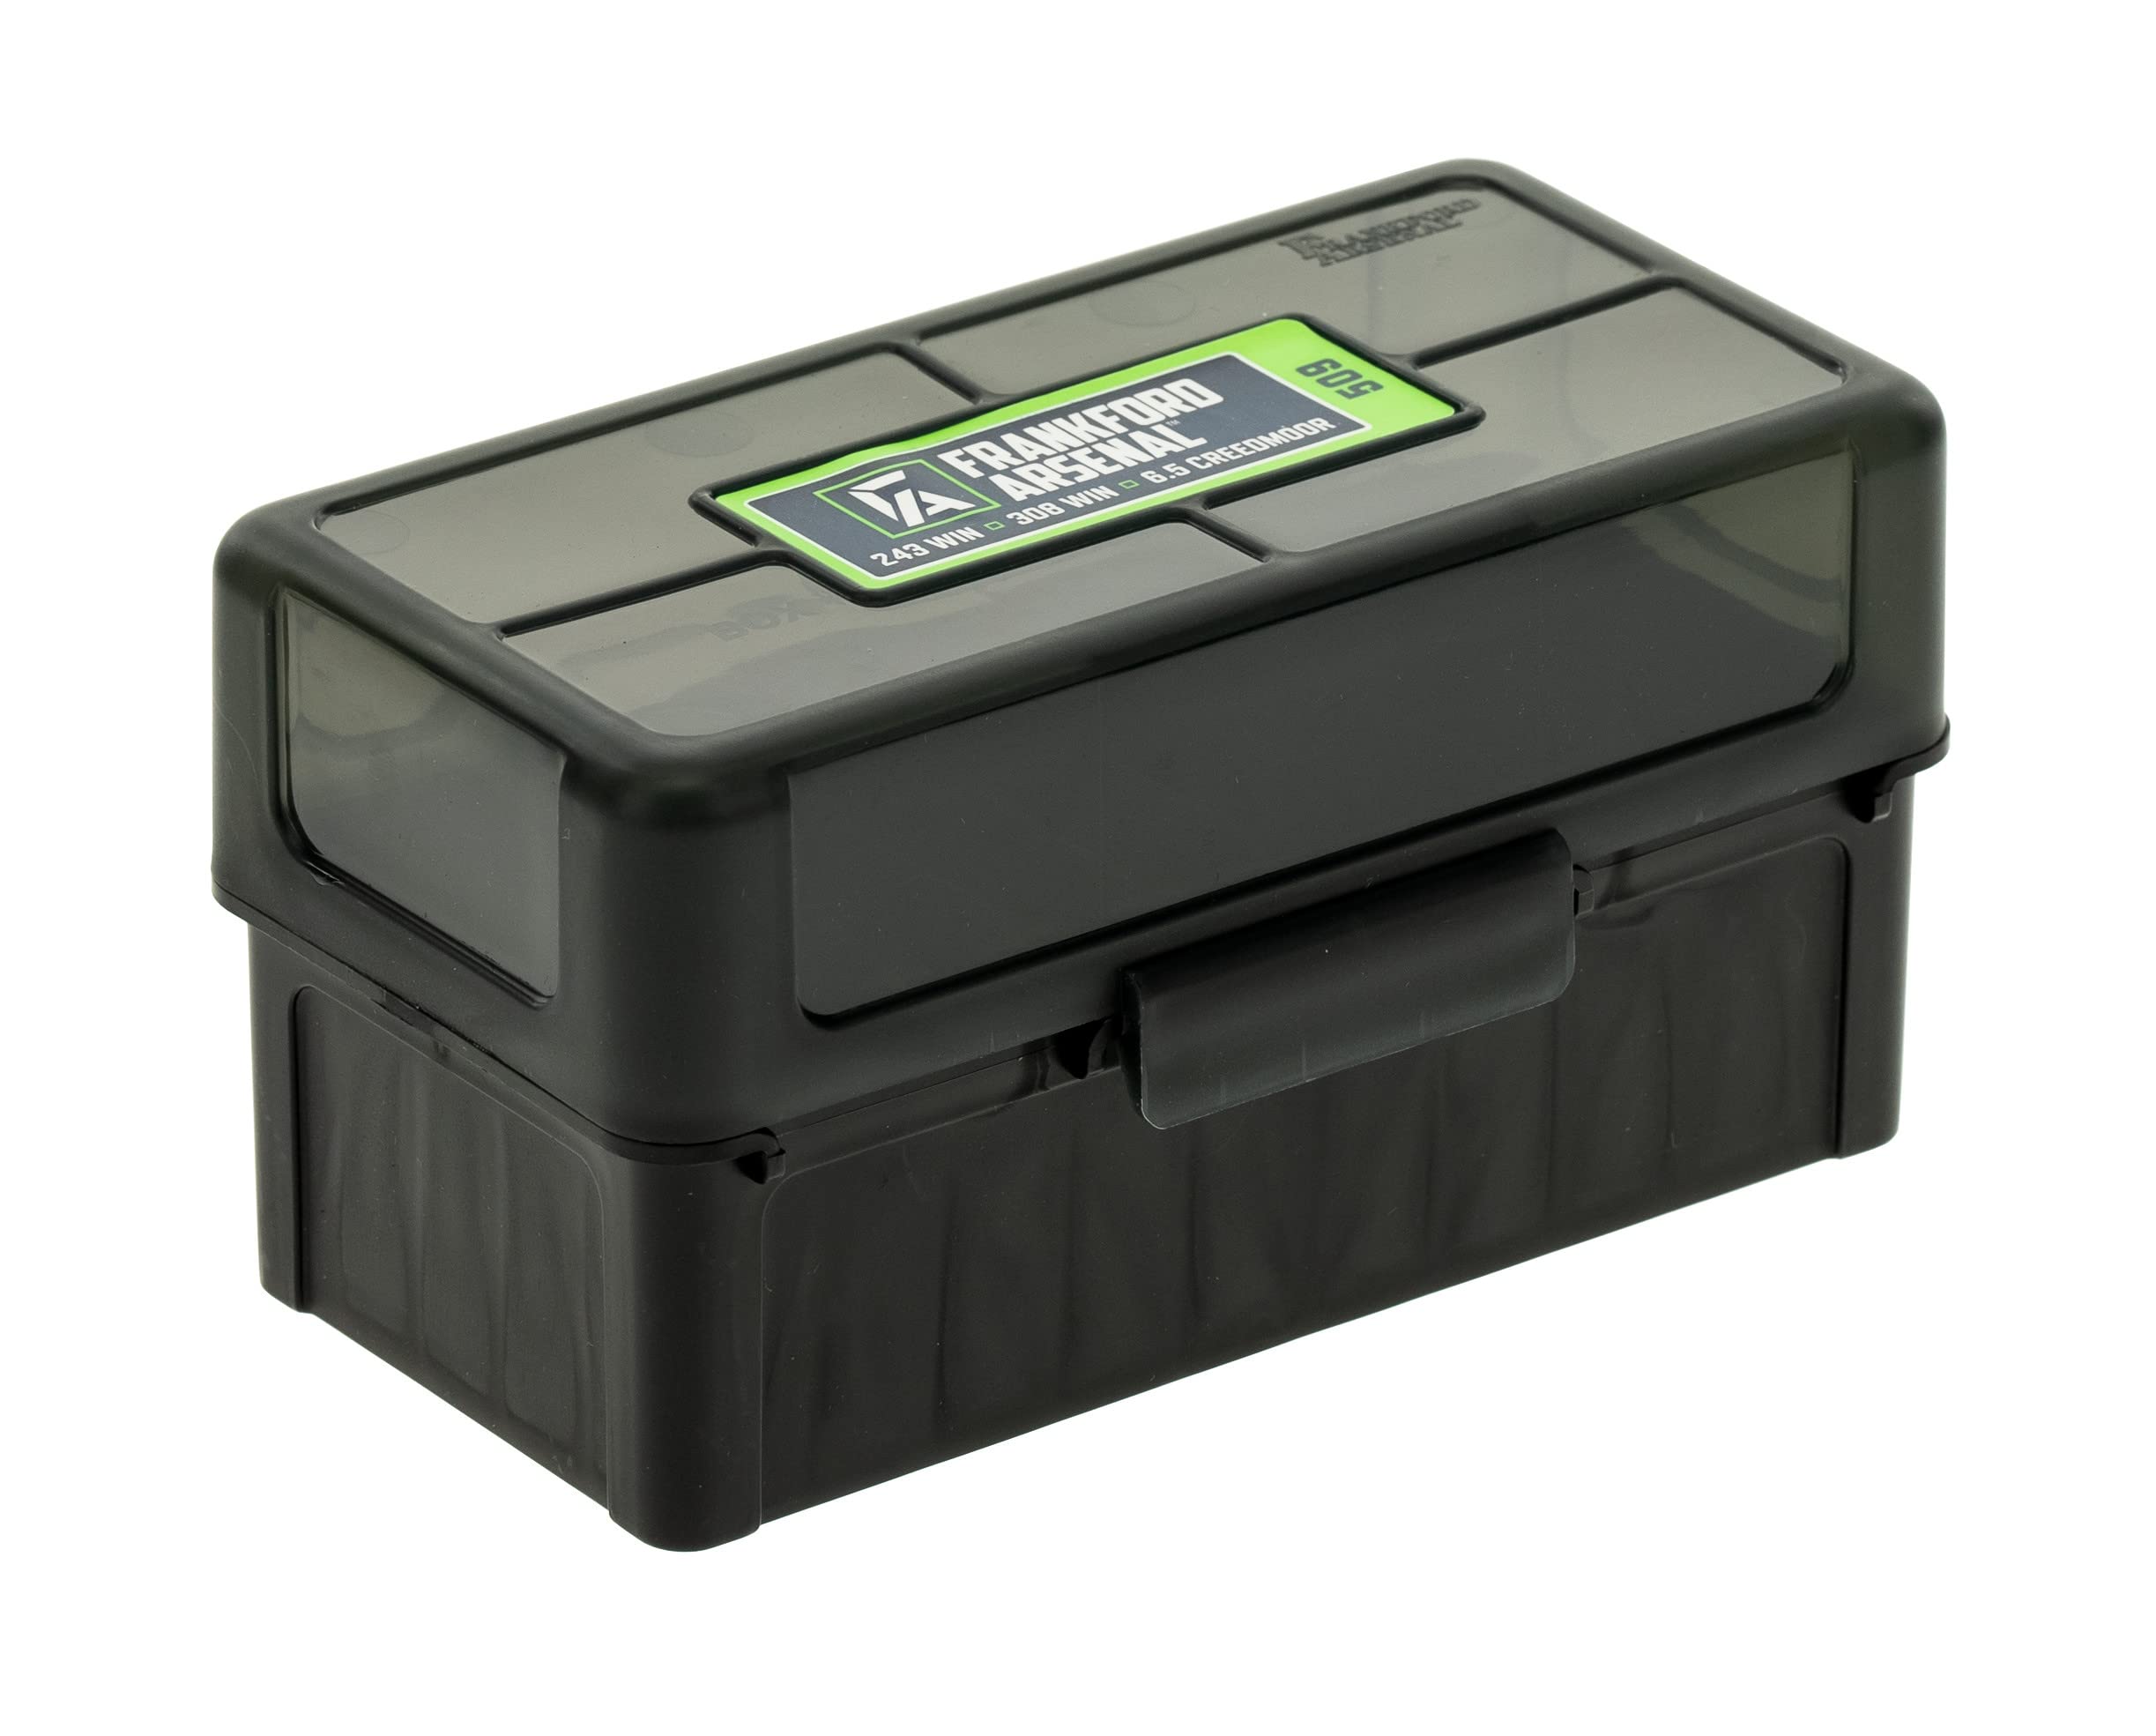 Frankford Arsenal Hinge-Top Ammo Boxes with True Mechanical Hinge